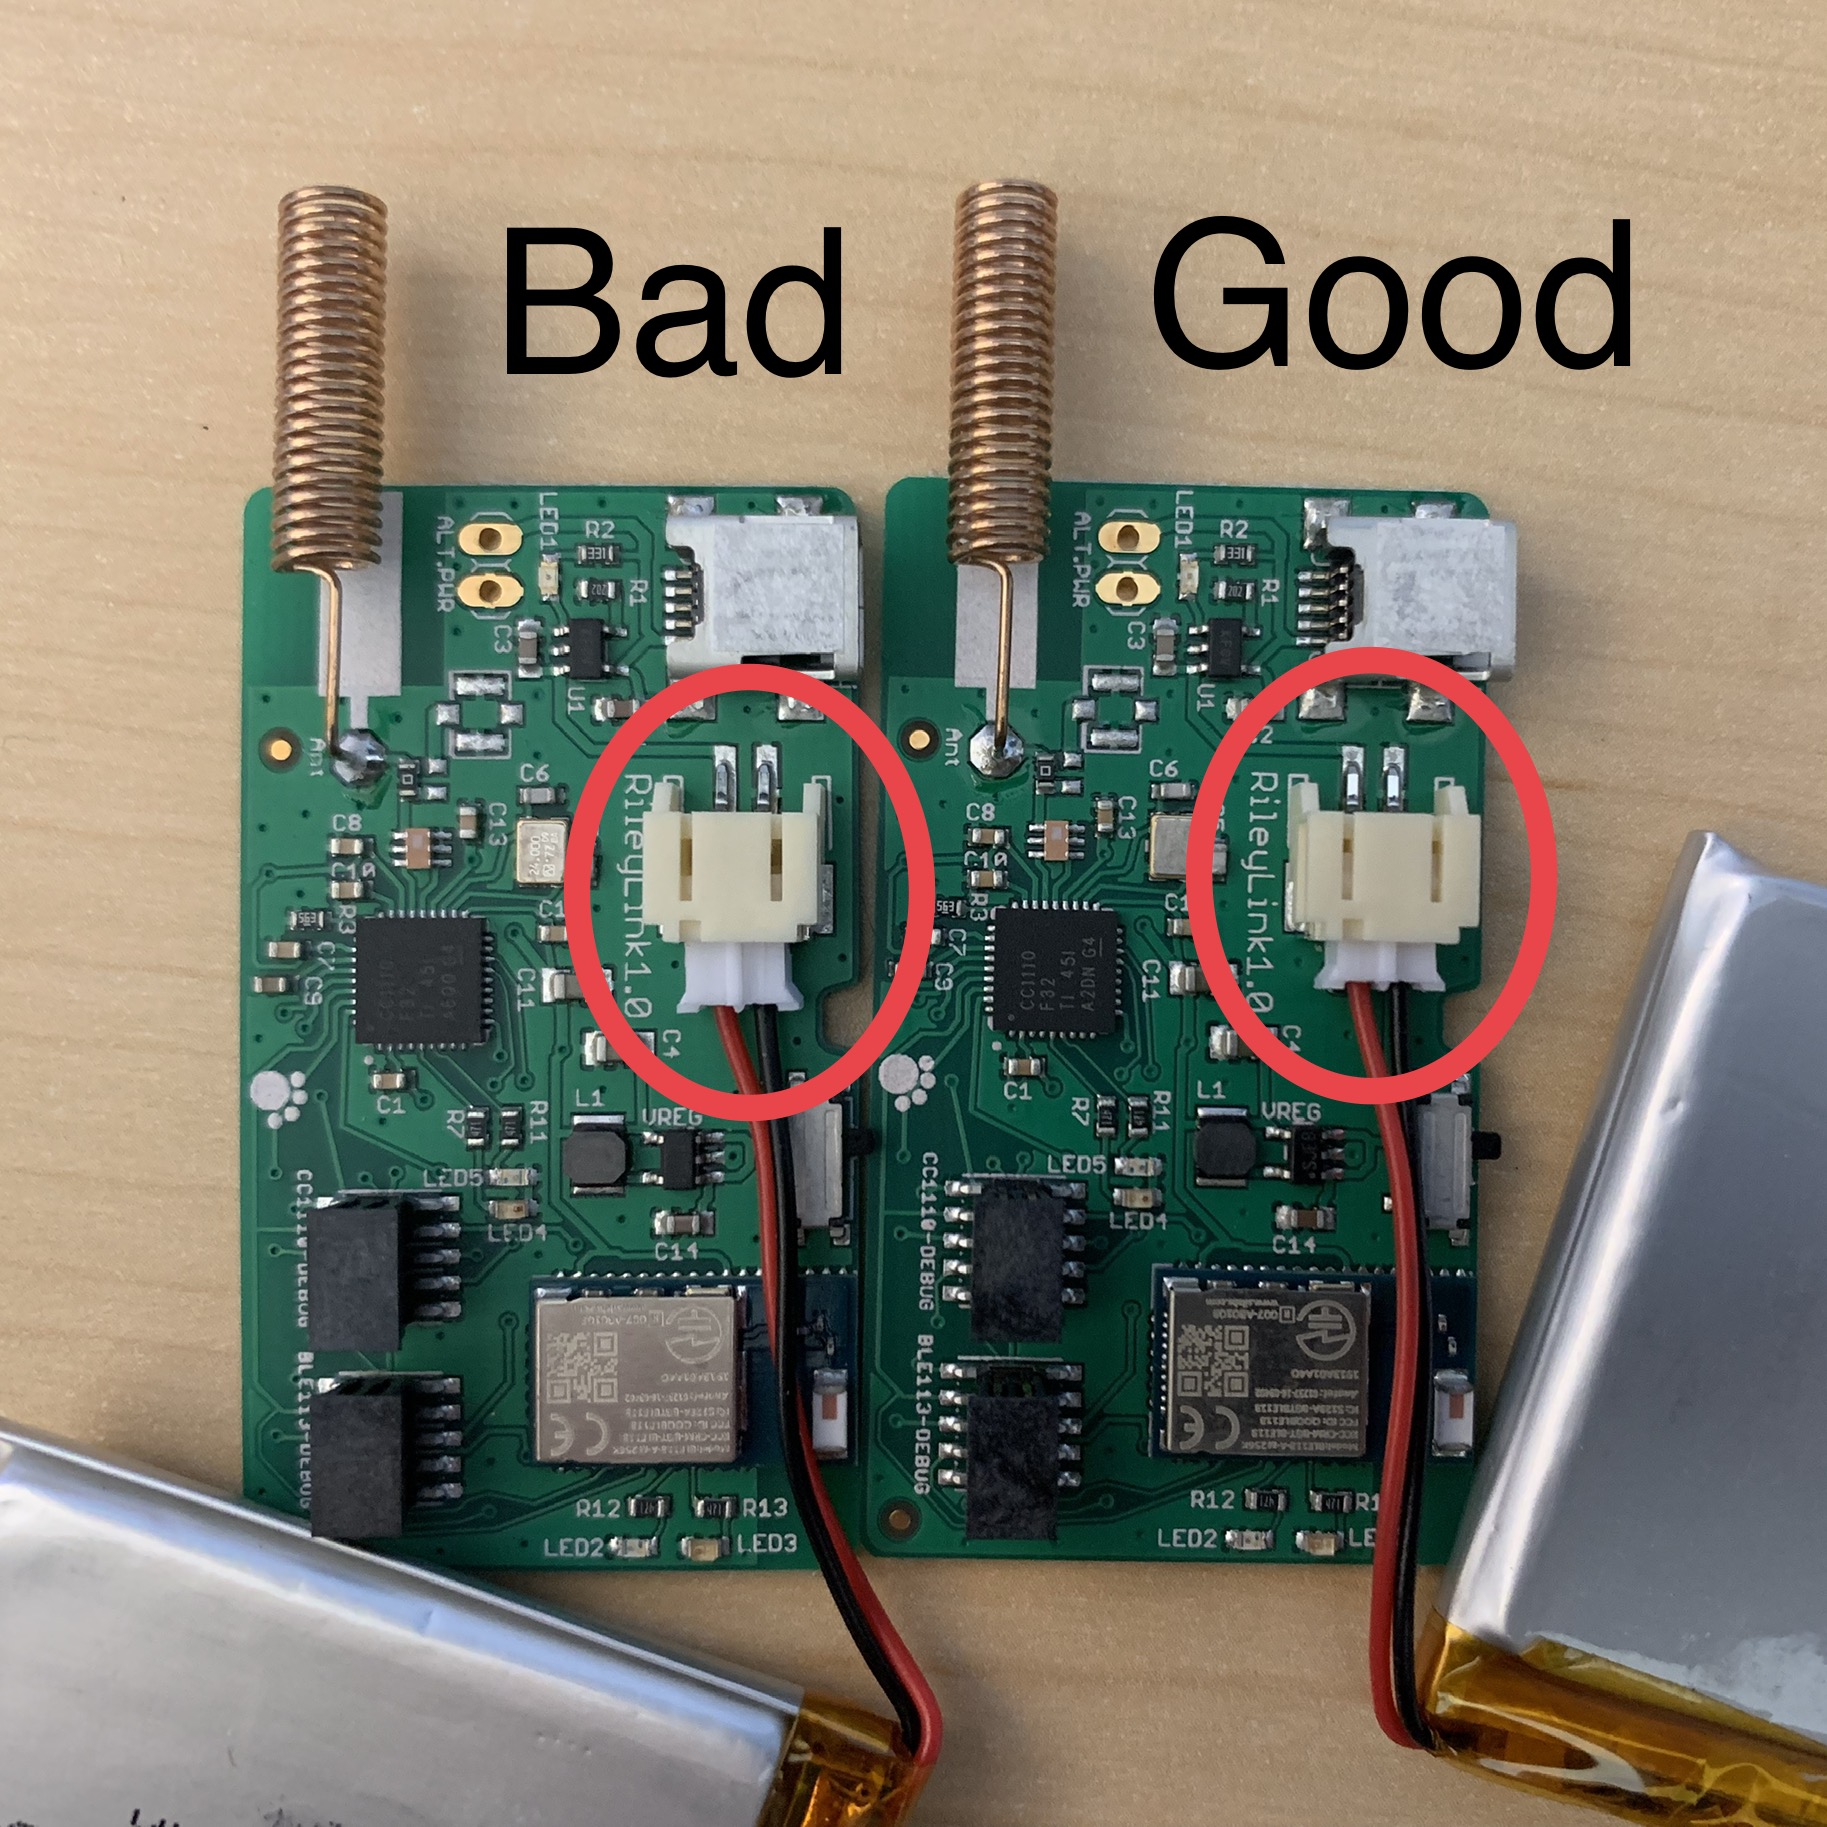 RileyLink showing Bad and Good battery insertion